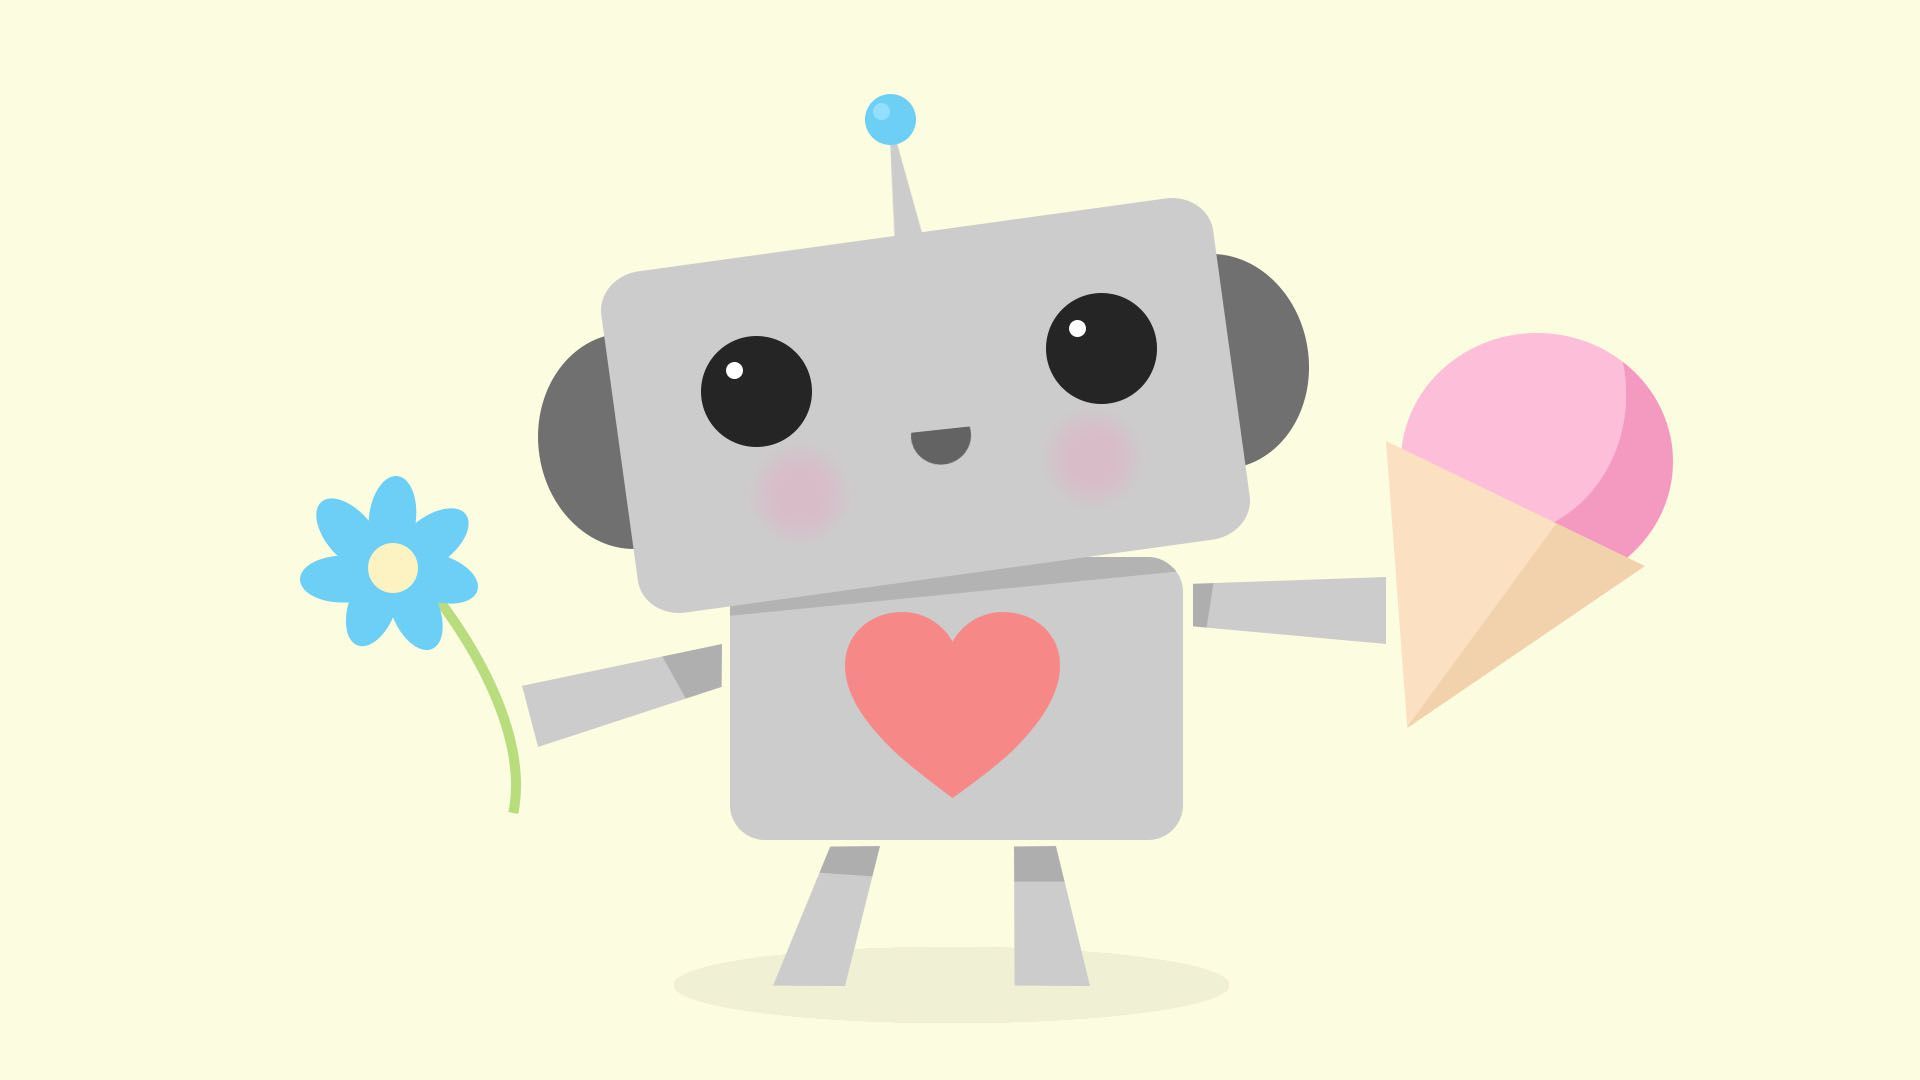 Illustration of a friendly robot bearing flowers and an ice cream cone